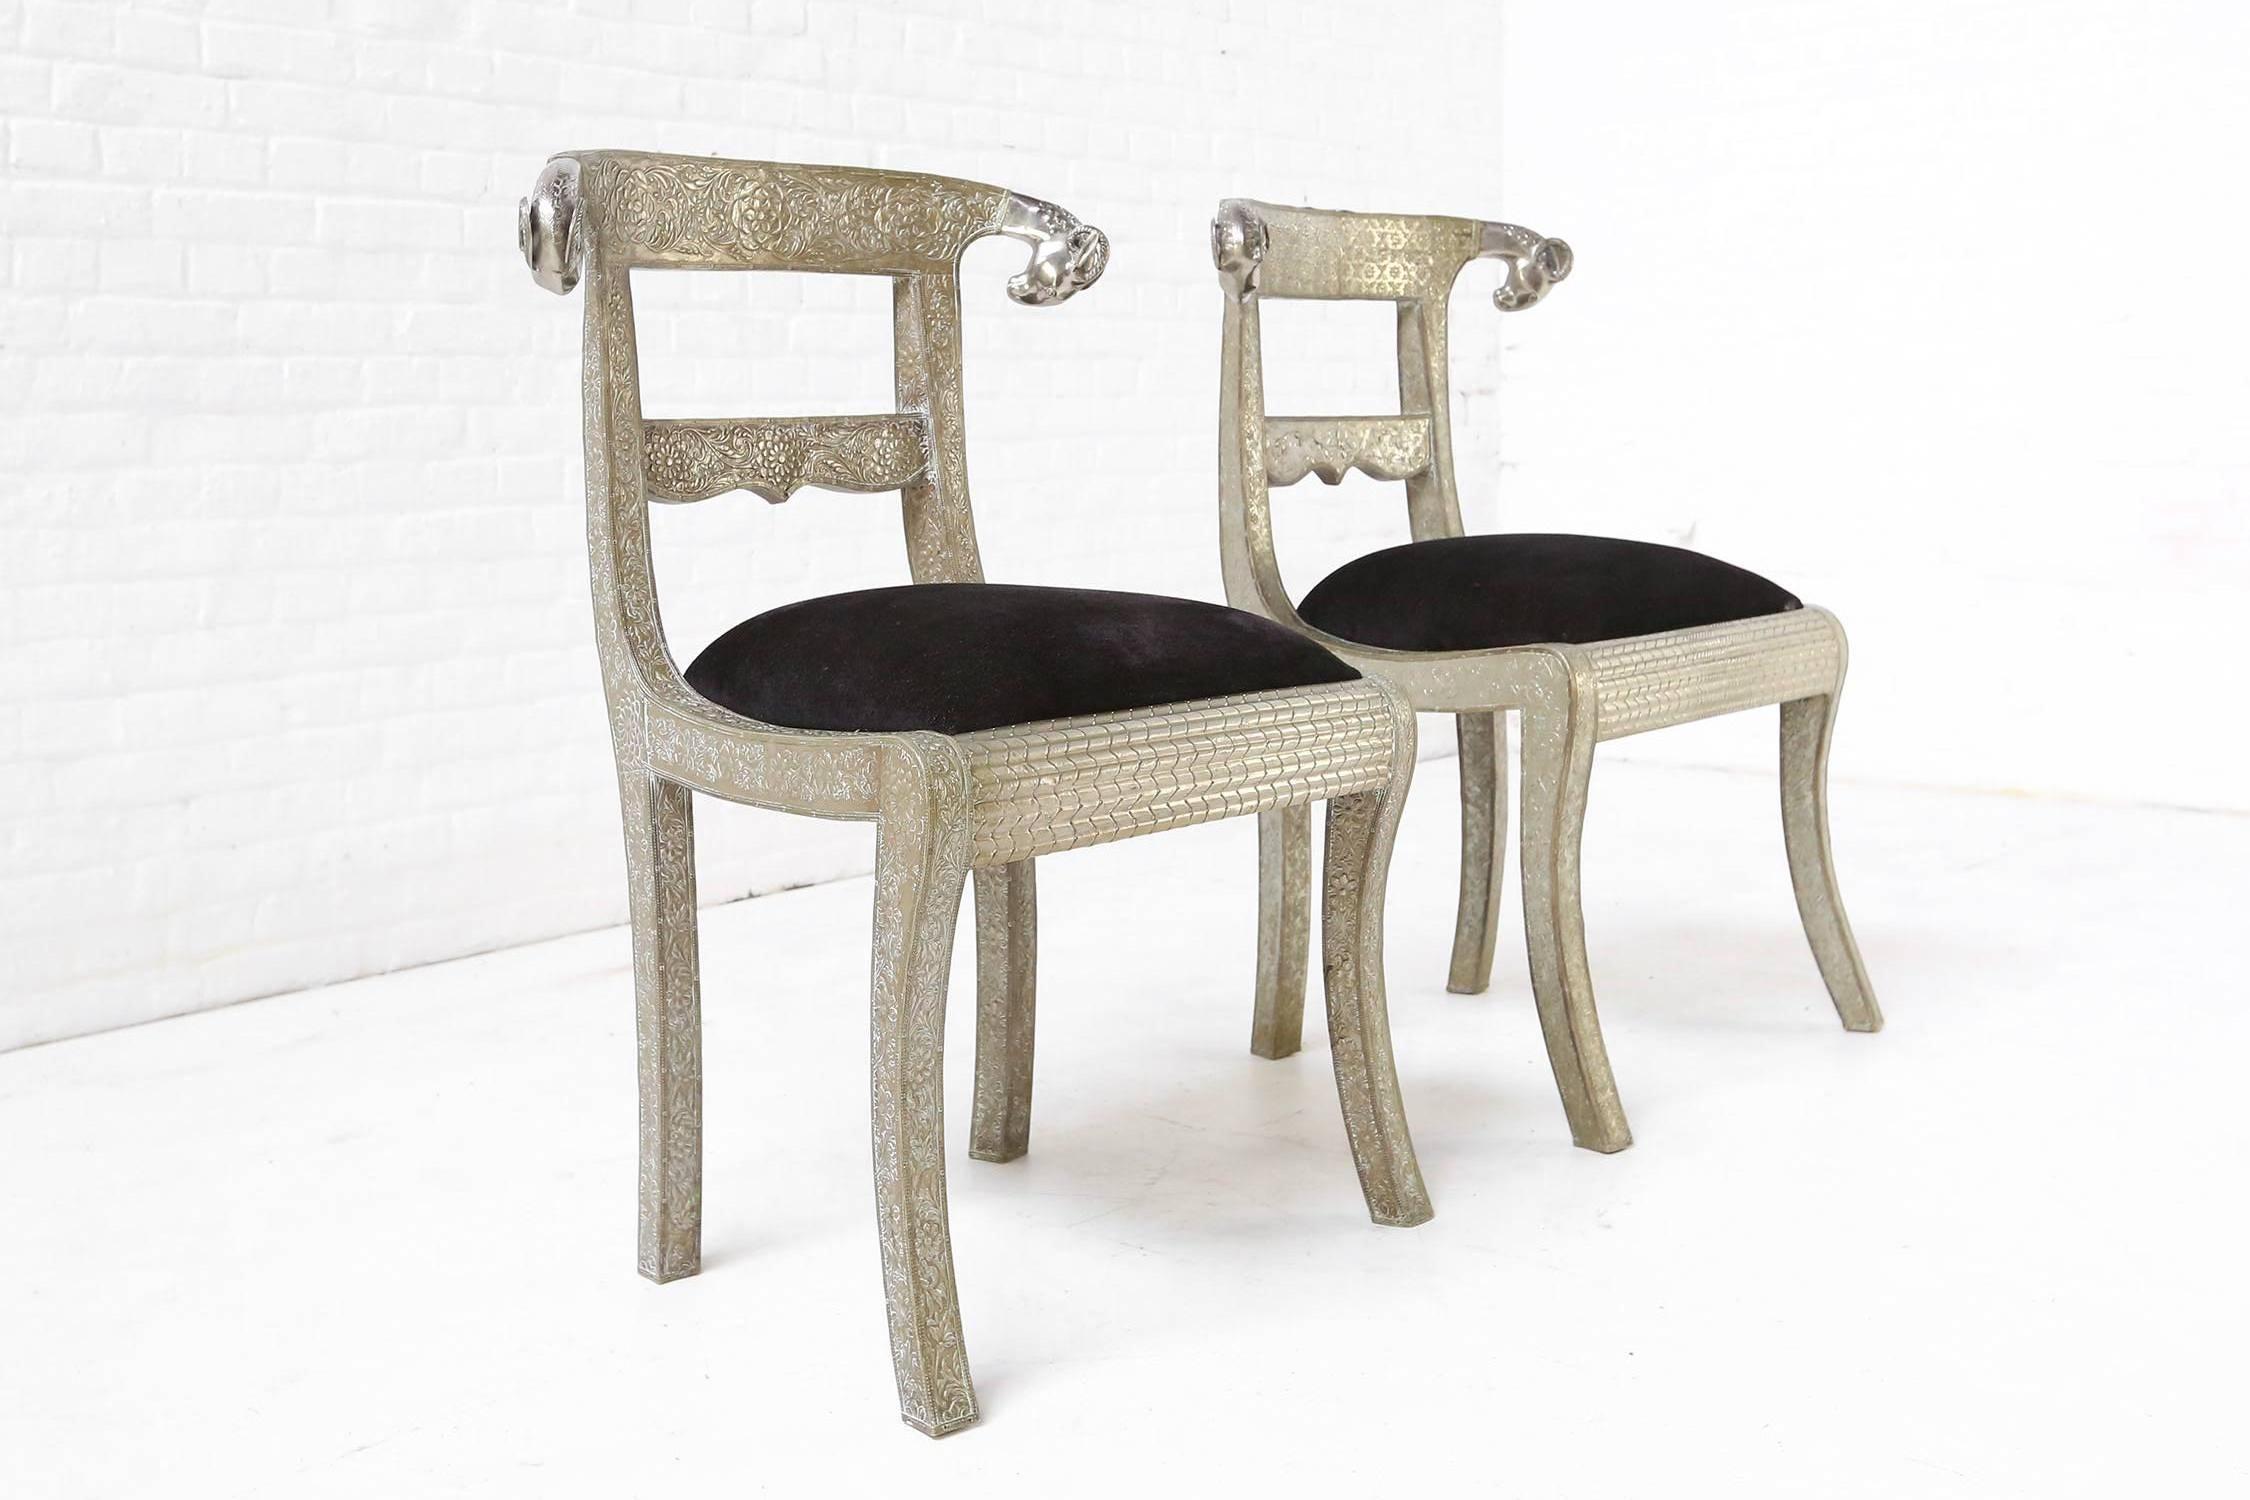 Desirable pair of vintage Anglo-Indian dowry side chairs with ram's head accents. These wonderful chairs feature wooden frames clad in floral embossed silver metal and polished scrolling ram's heads. Seats are upholstered in a black velvet fabric.